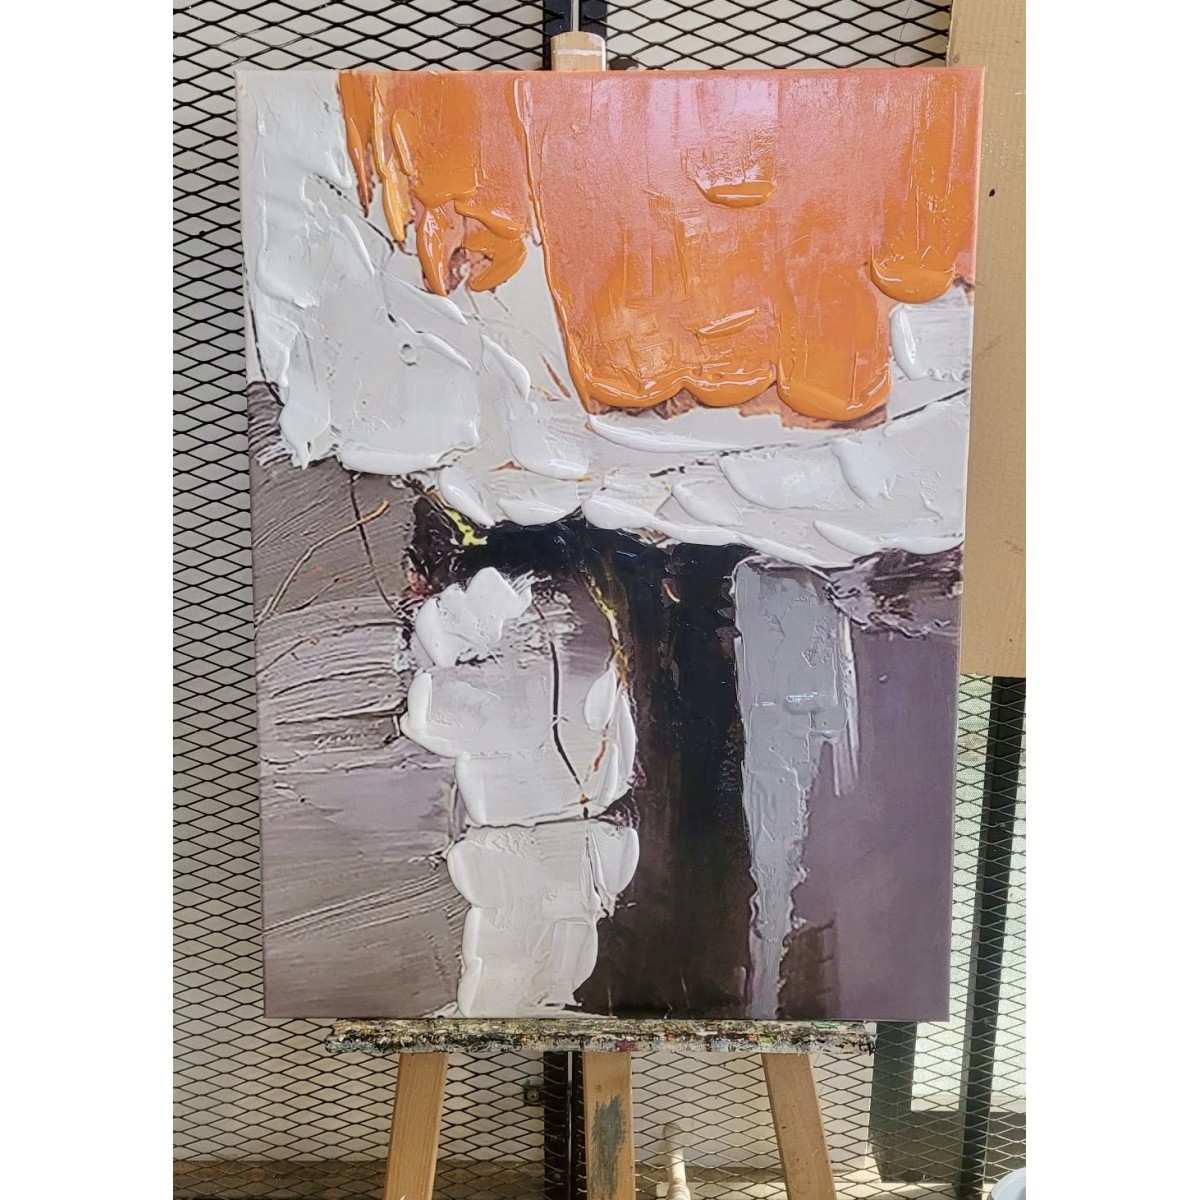 Orange with Black n White 3d Heavy Textured Partial Oil Painting